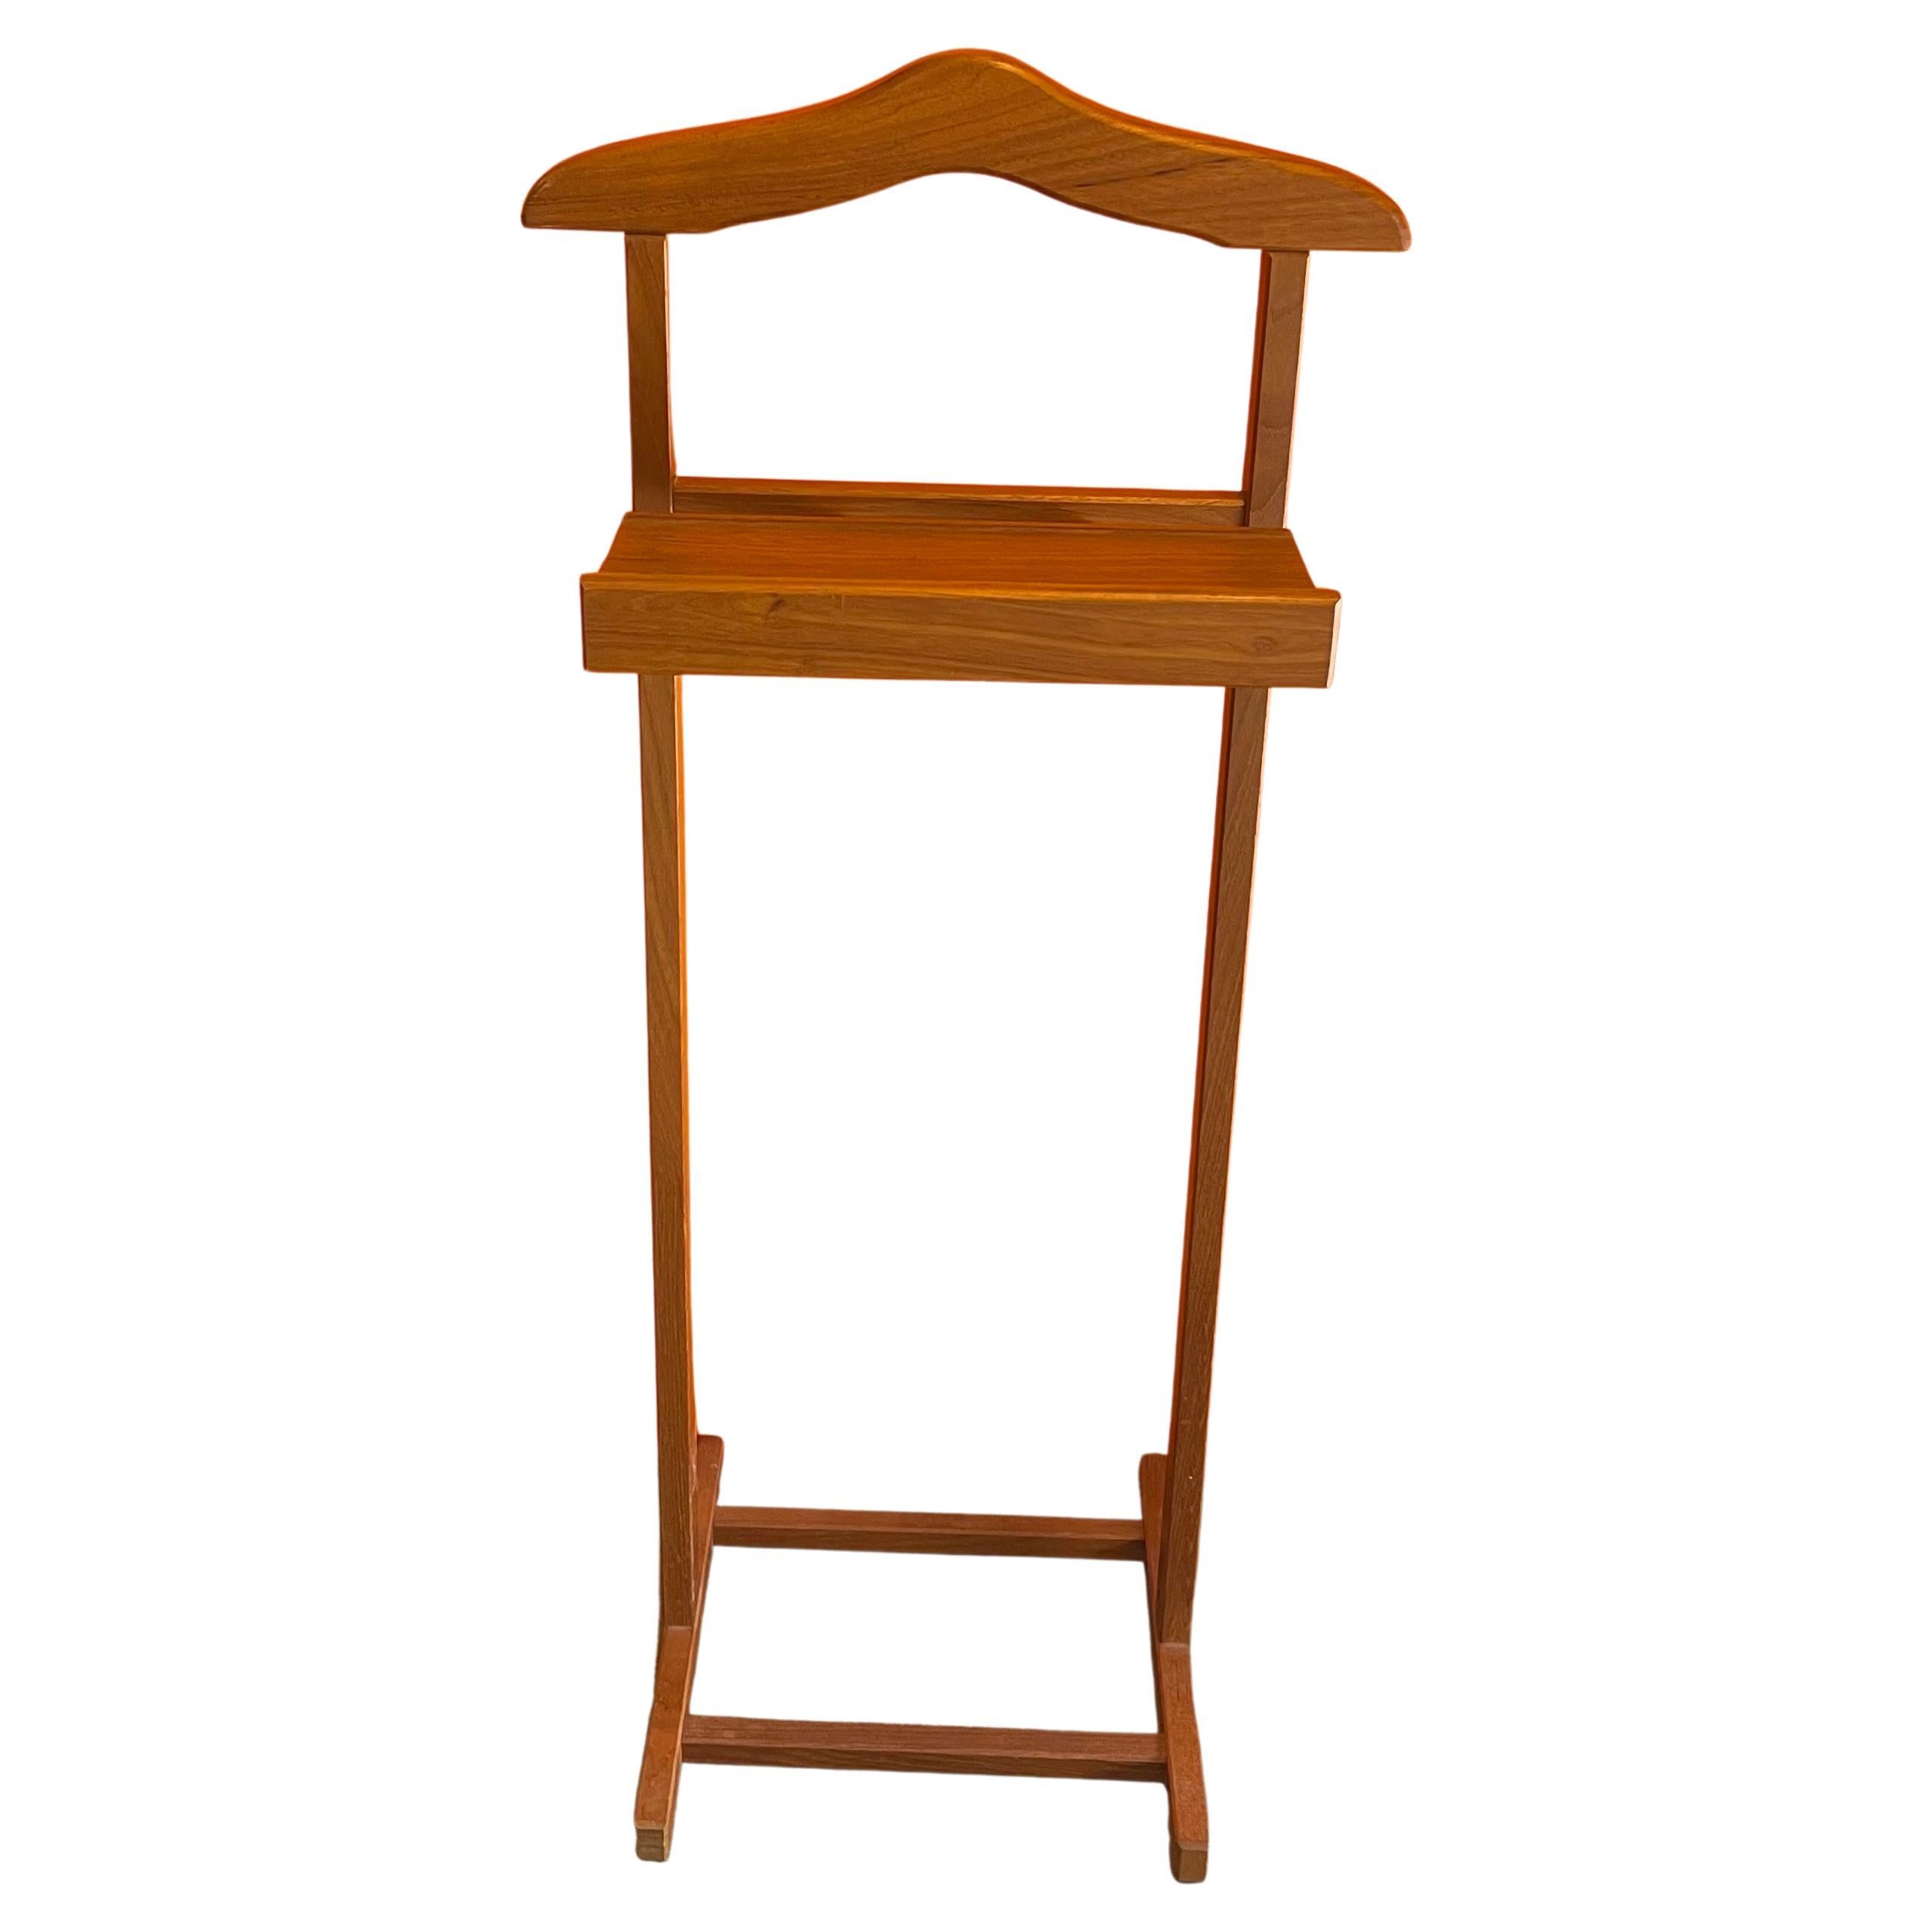 Danish modern solid teak valet rack with shelf by PBJ Mobler Denmark, circa 1970s. The rack is in very good vintage condition and measures 17.5